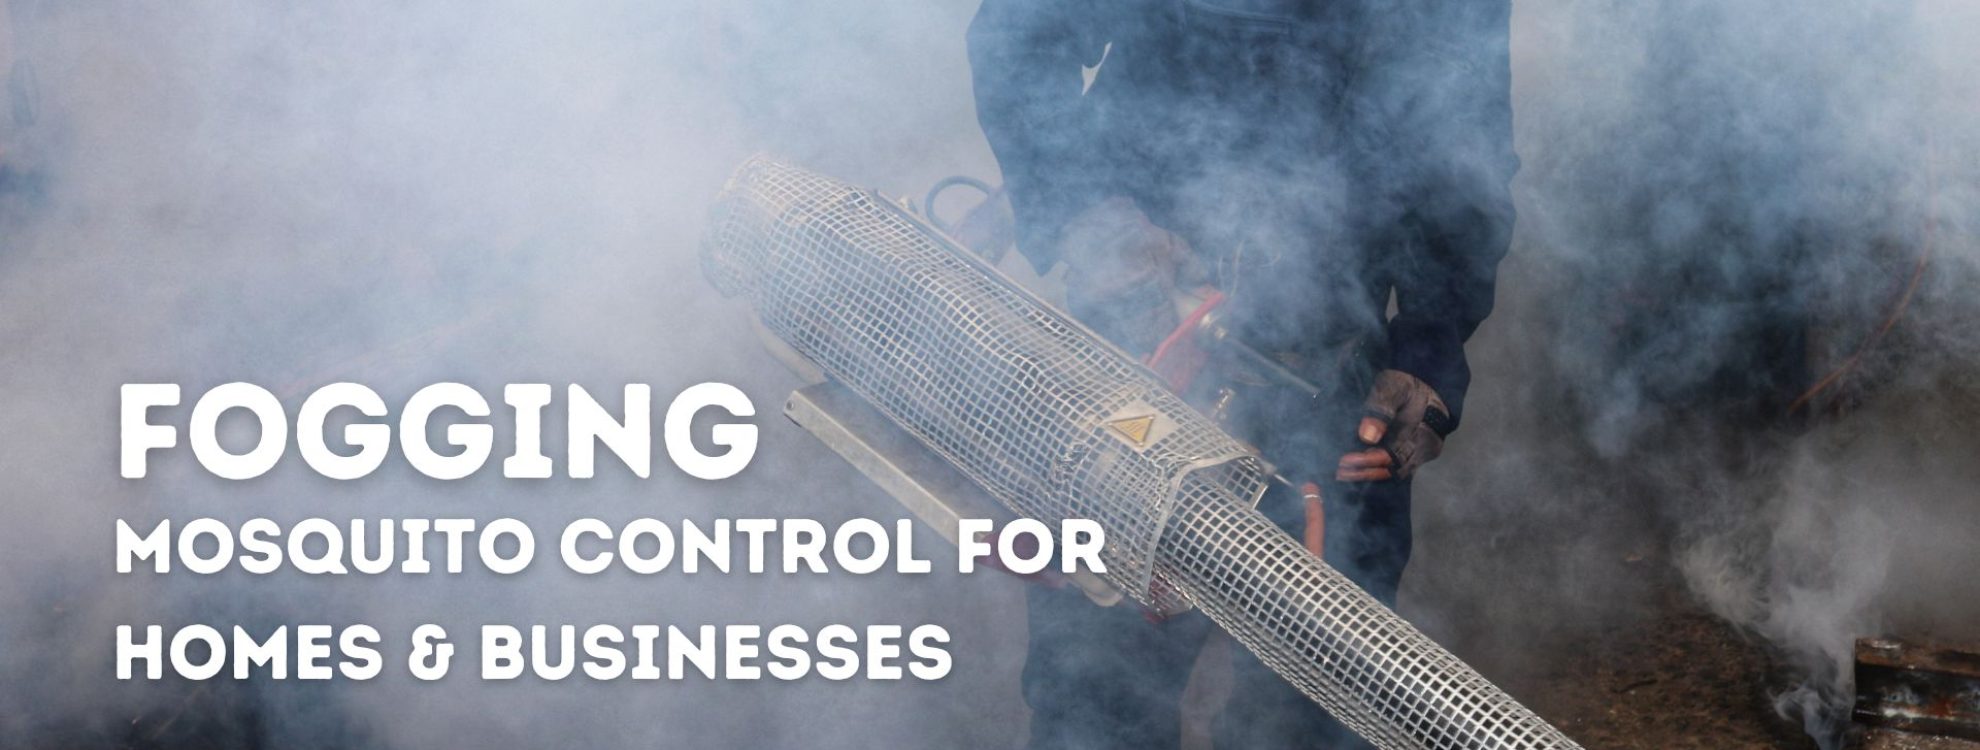 fogging services being conducted for homes & businesses